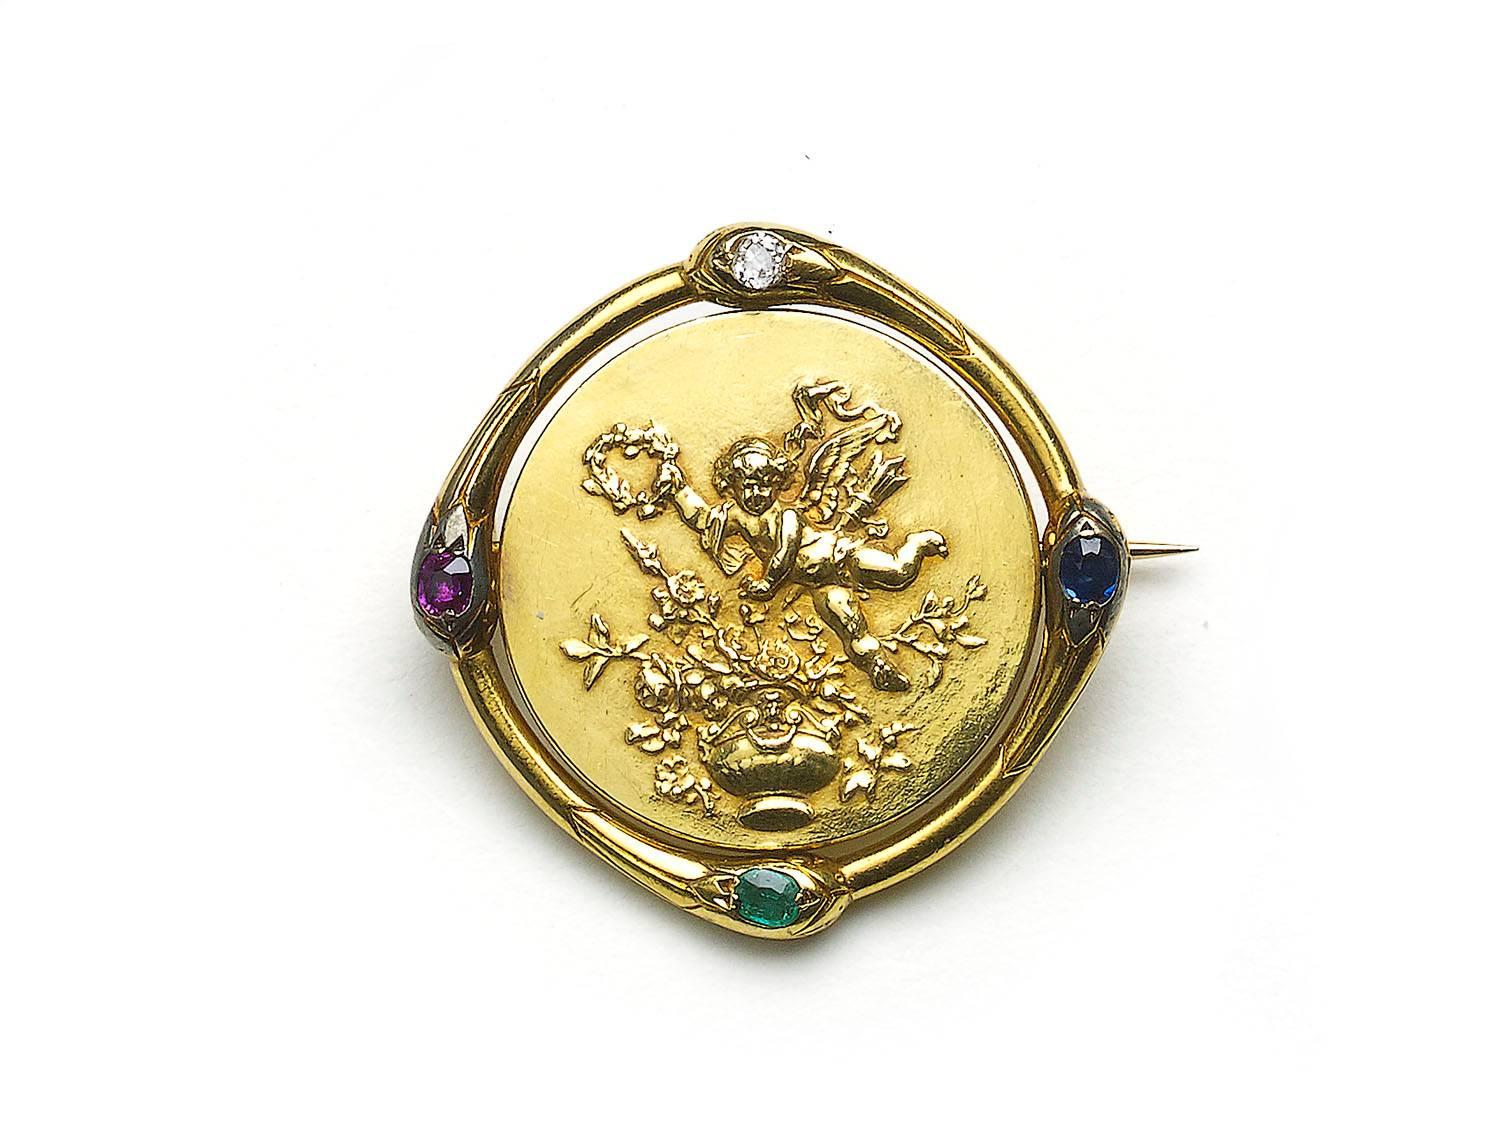 A French gold brooch, central spinning disc depicting a cherub with a lute, holding onto surrounding flowers, with a cherub holding a wreath to the reverse, surrounded by four snakes biting each other's tail, each set with a gemstone in it's head,